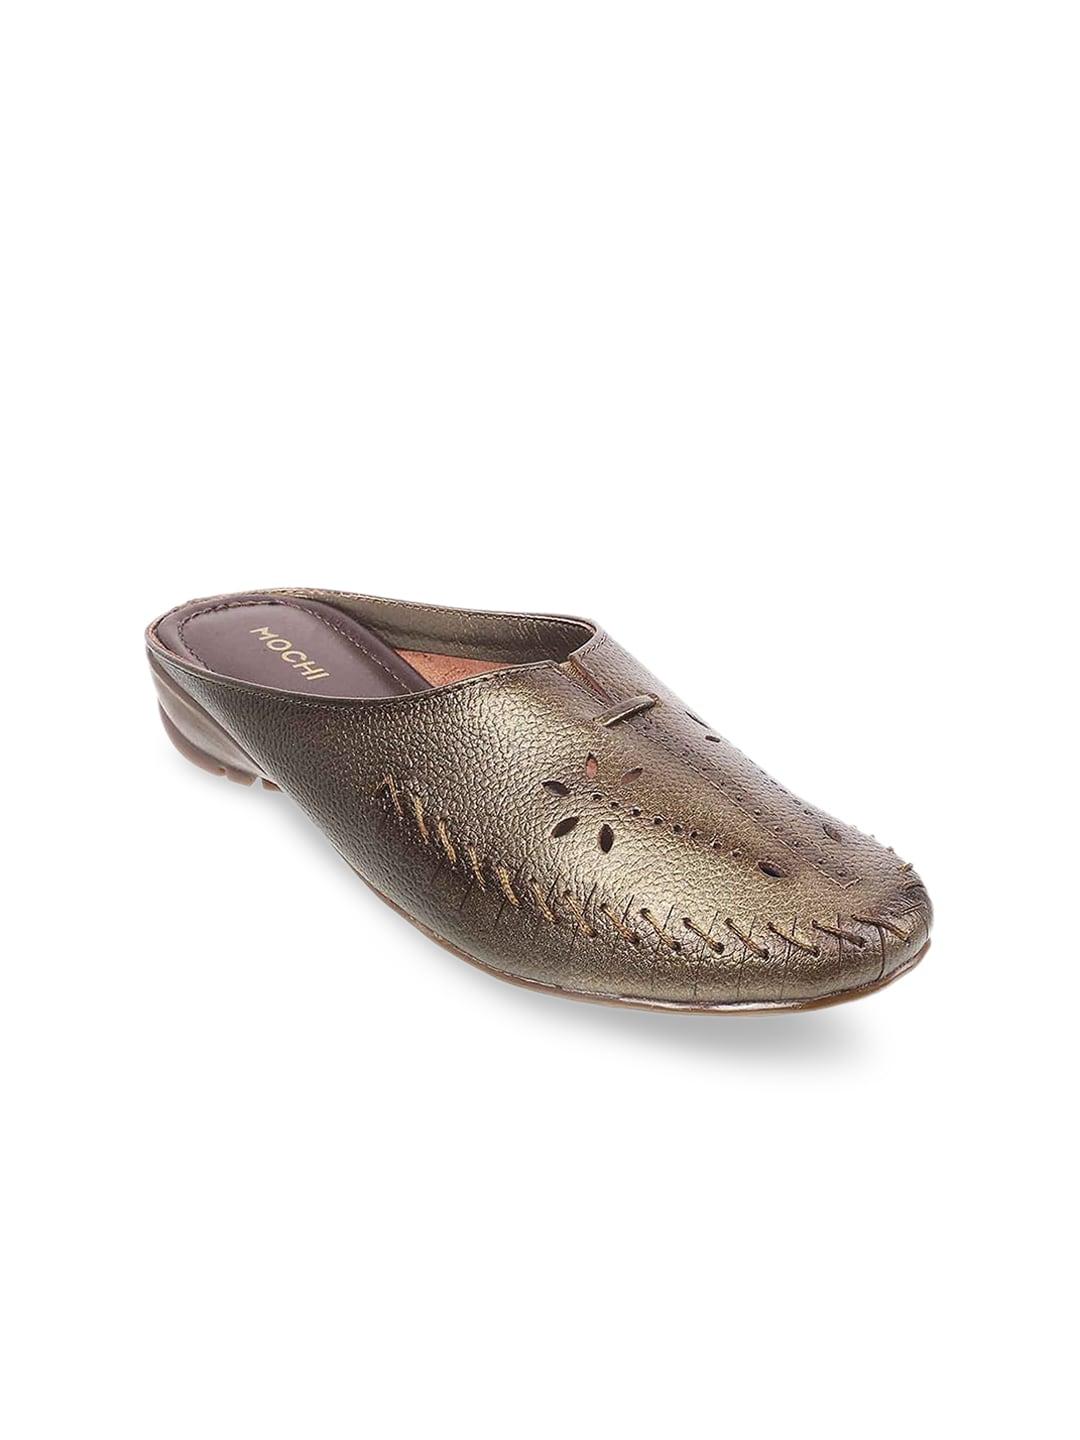 mochi-women-bronze-toned-mules-with-laser-cuts